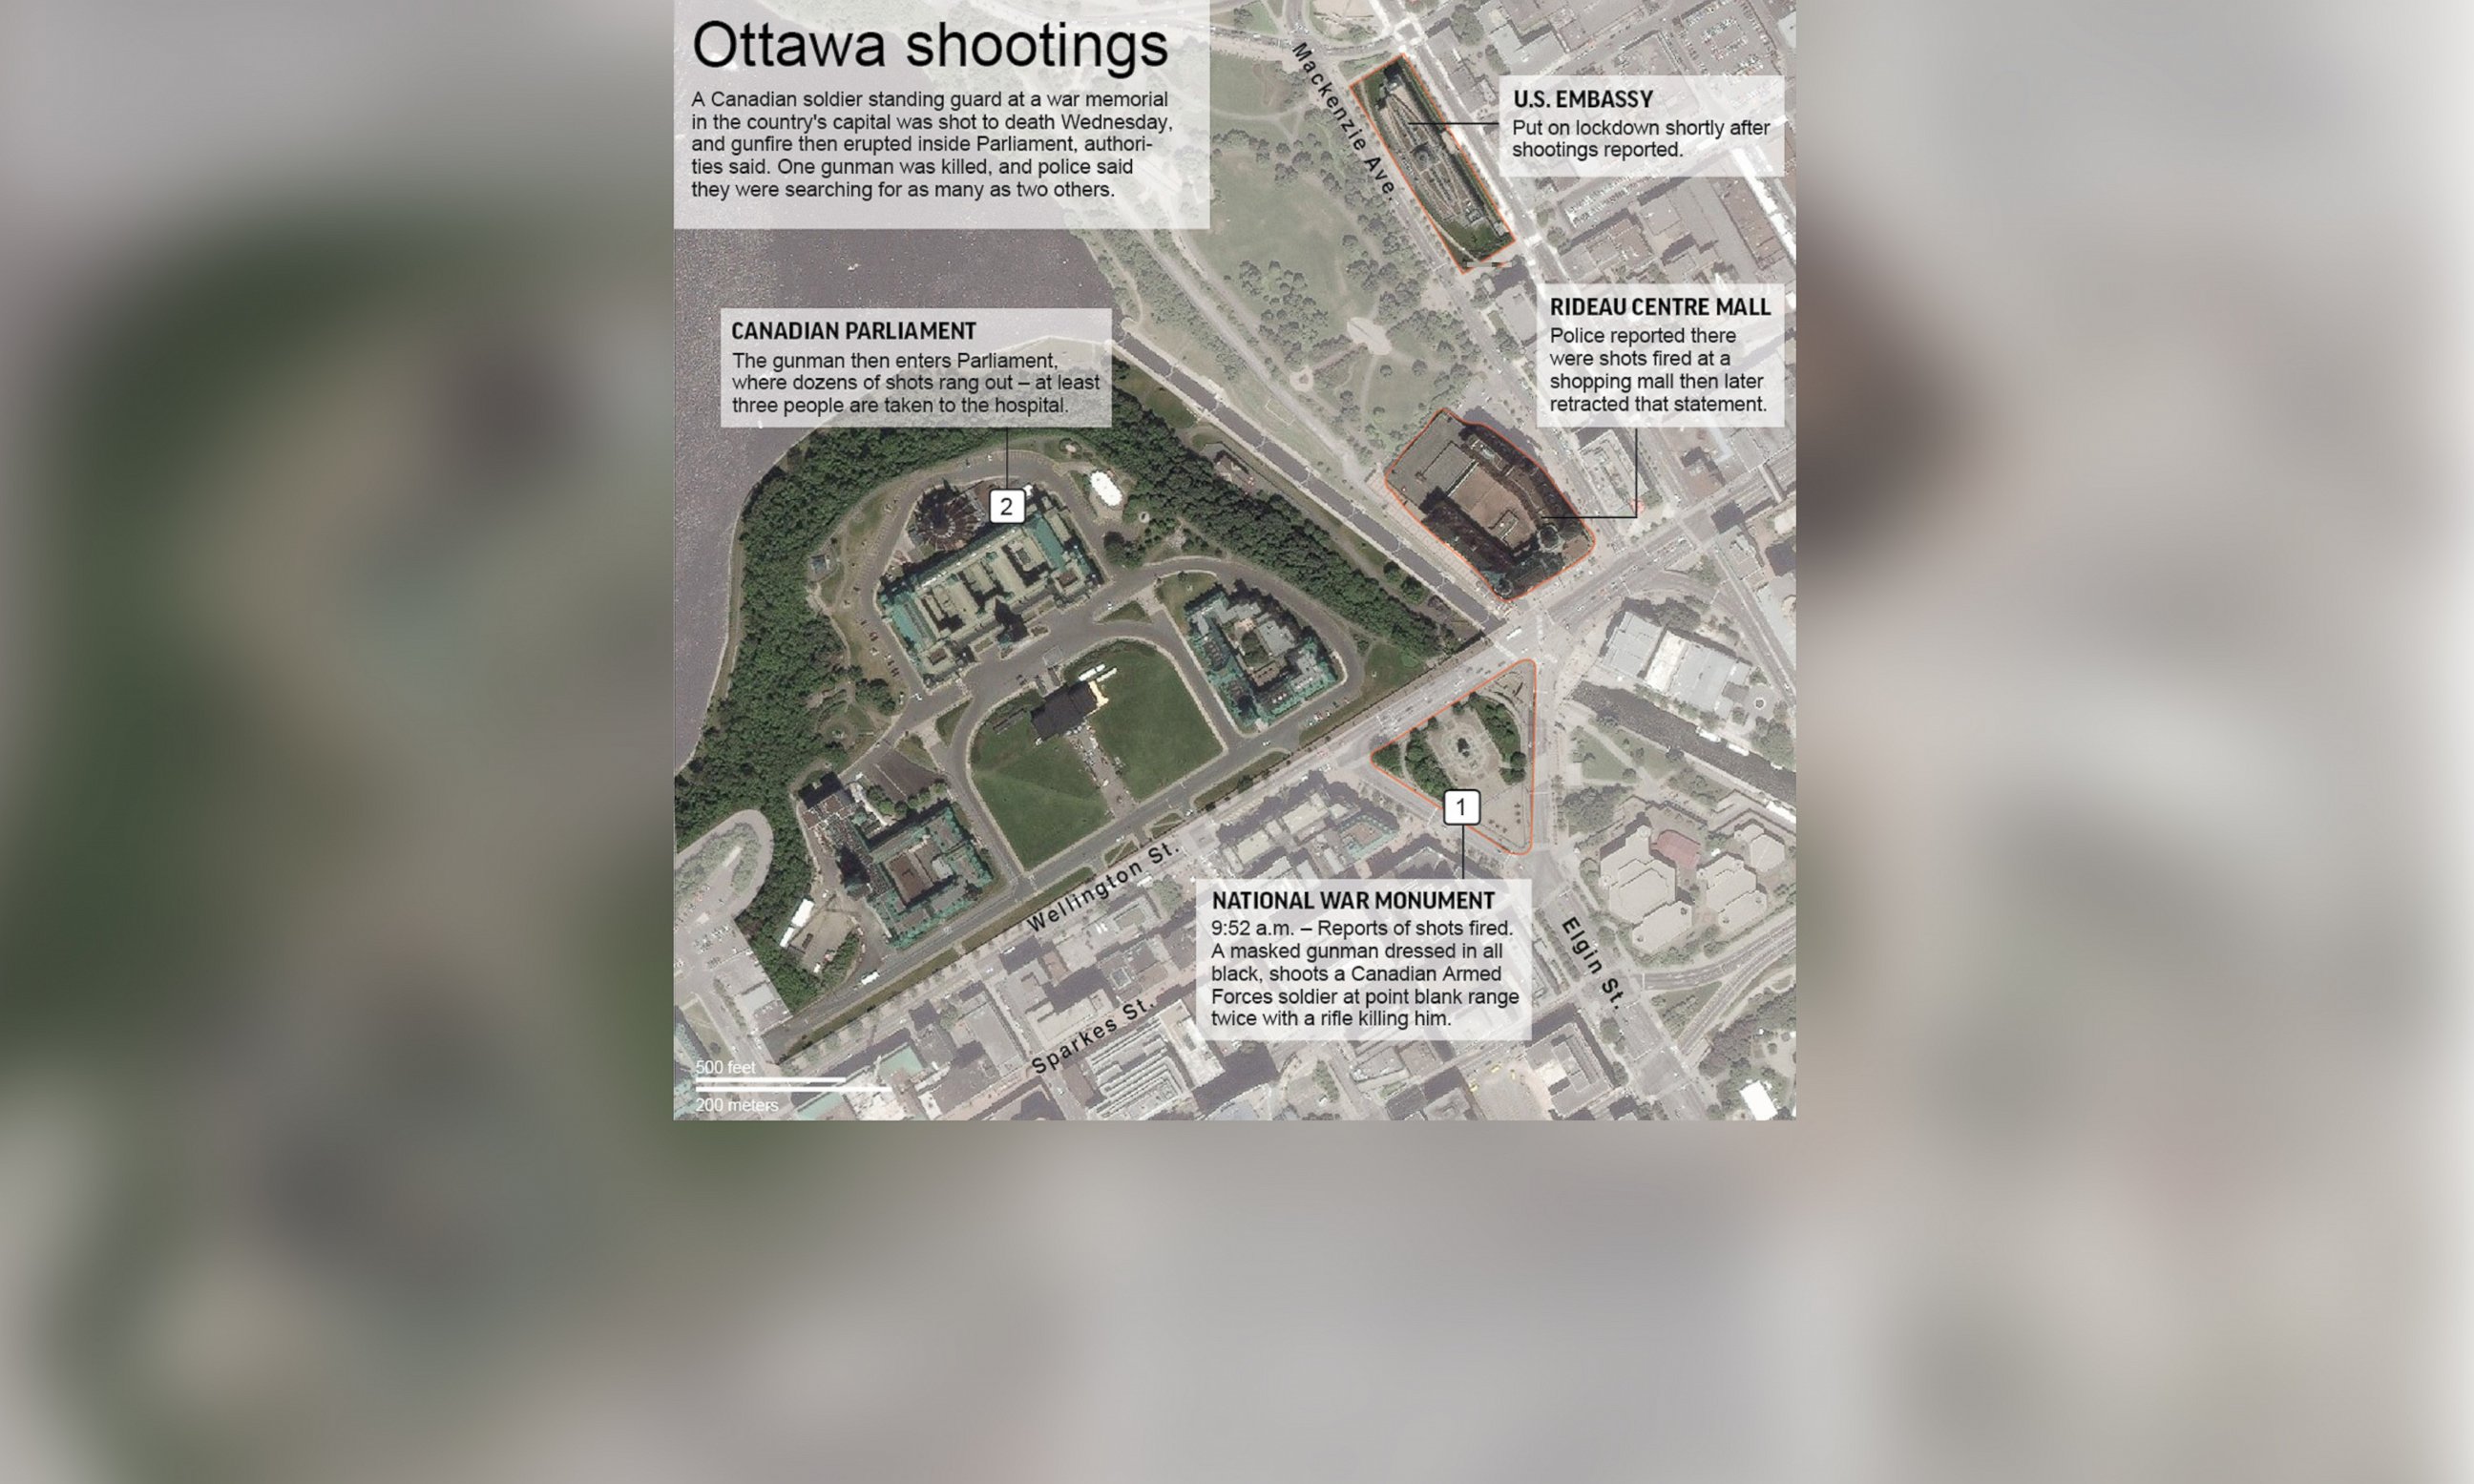 PHOTO: An AP map shows the locations of the National War Monument, Parliament and a shopping mall in Ottawa, Canada where gun shots were reported on Oct. 22, 2014.